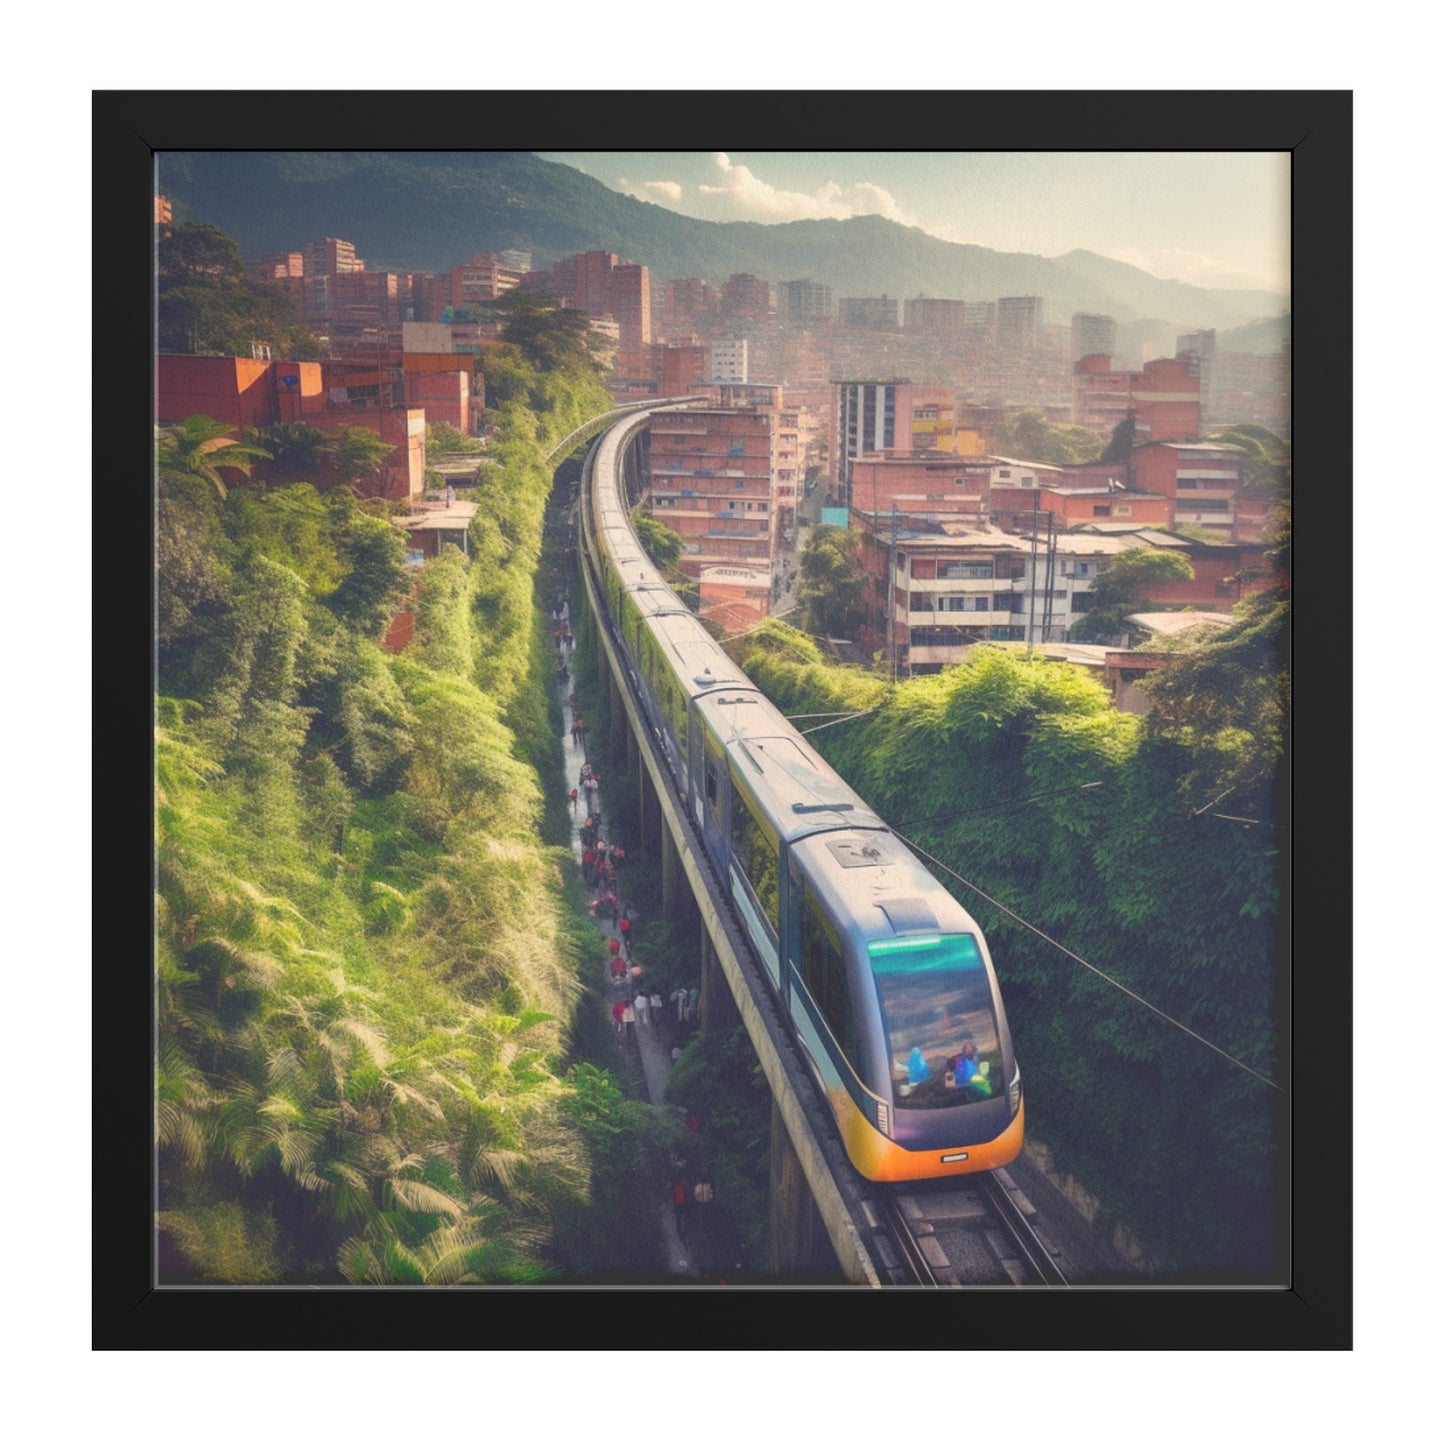 Tomorrow's Medellín: A Fusion of Tradition and Innovation